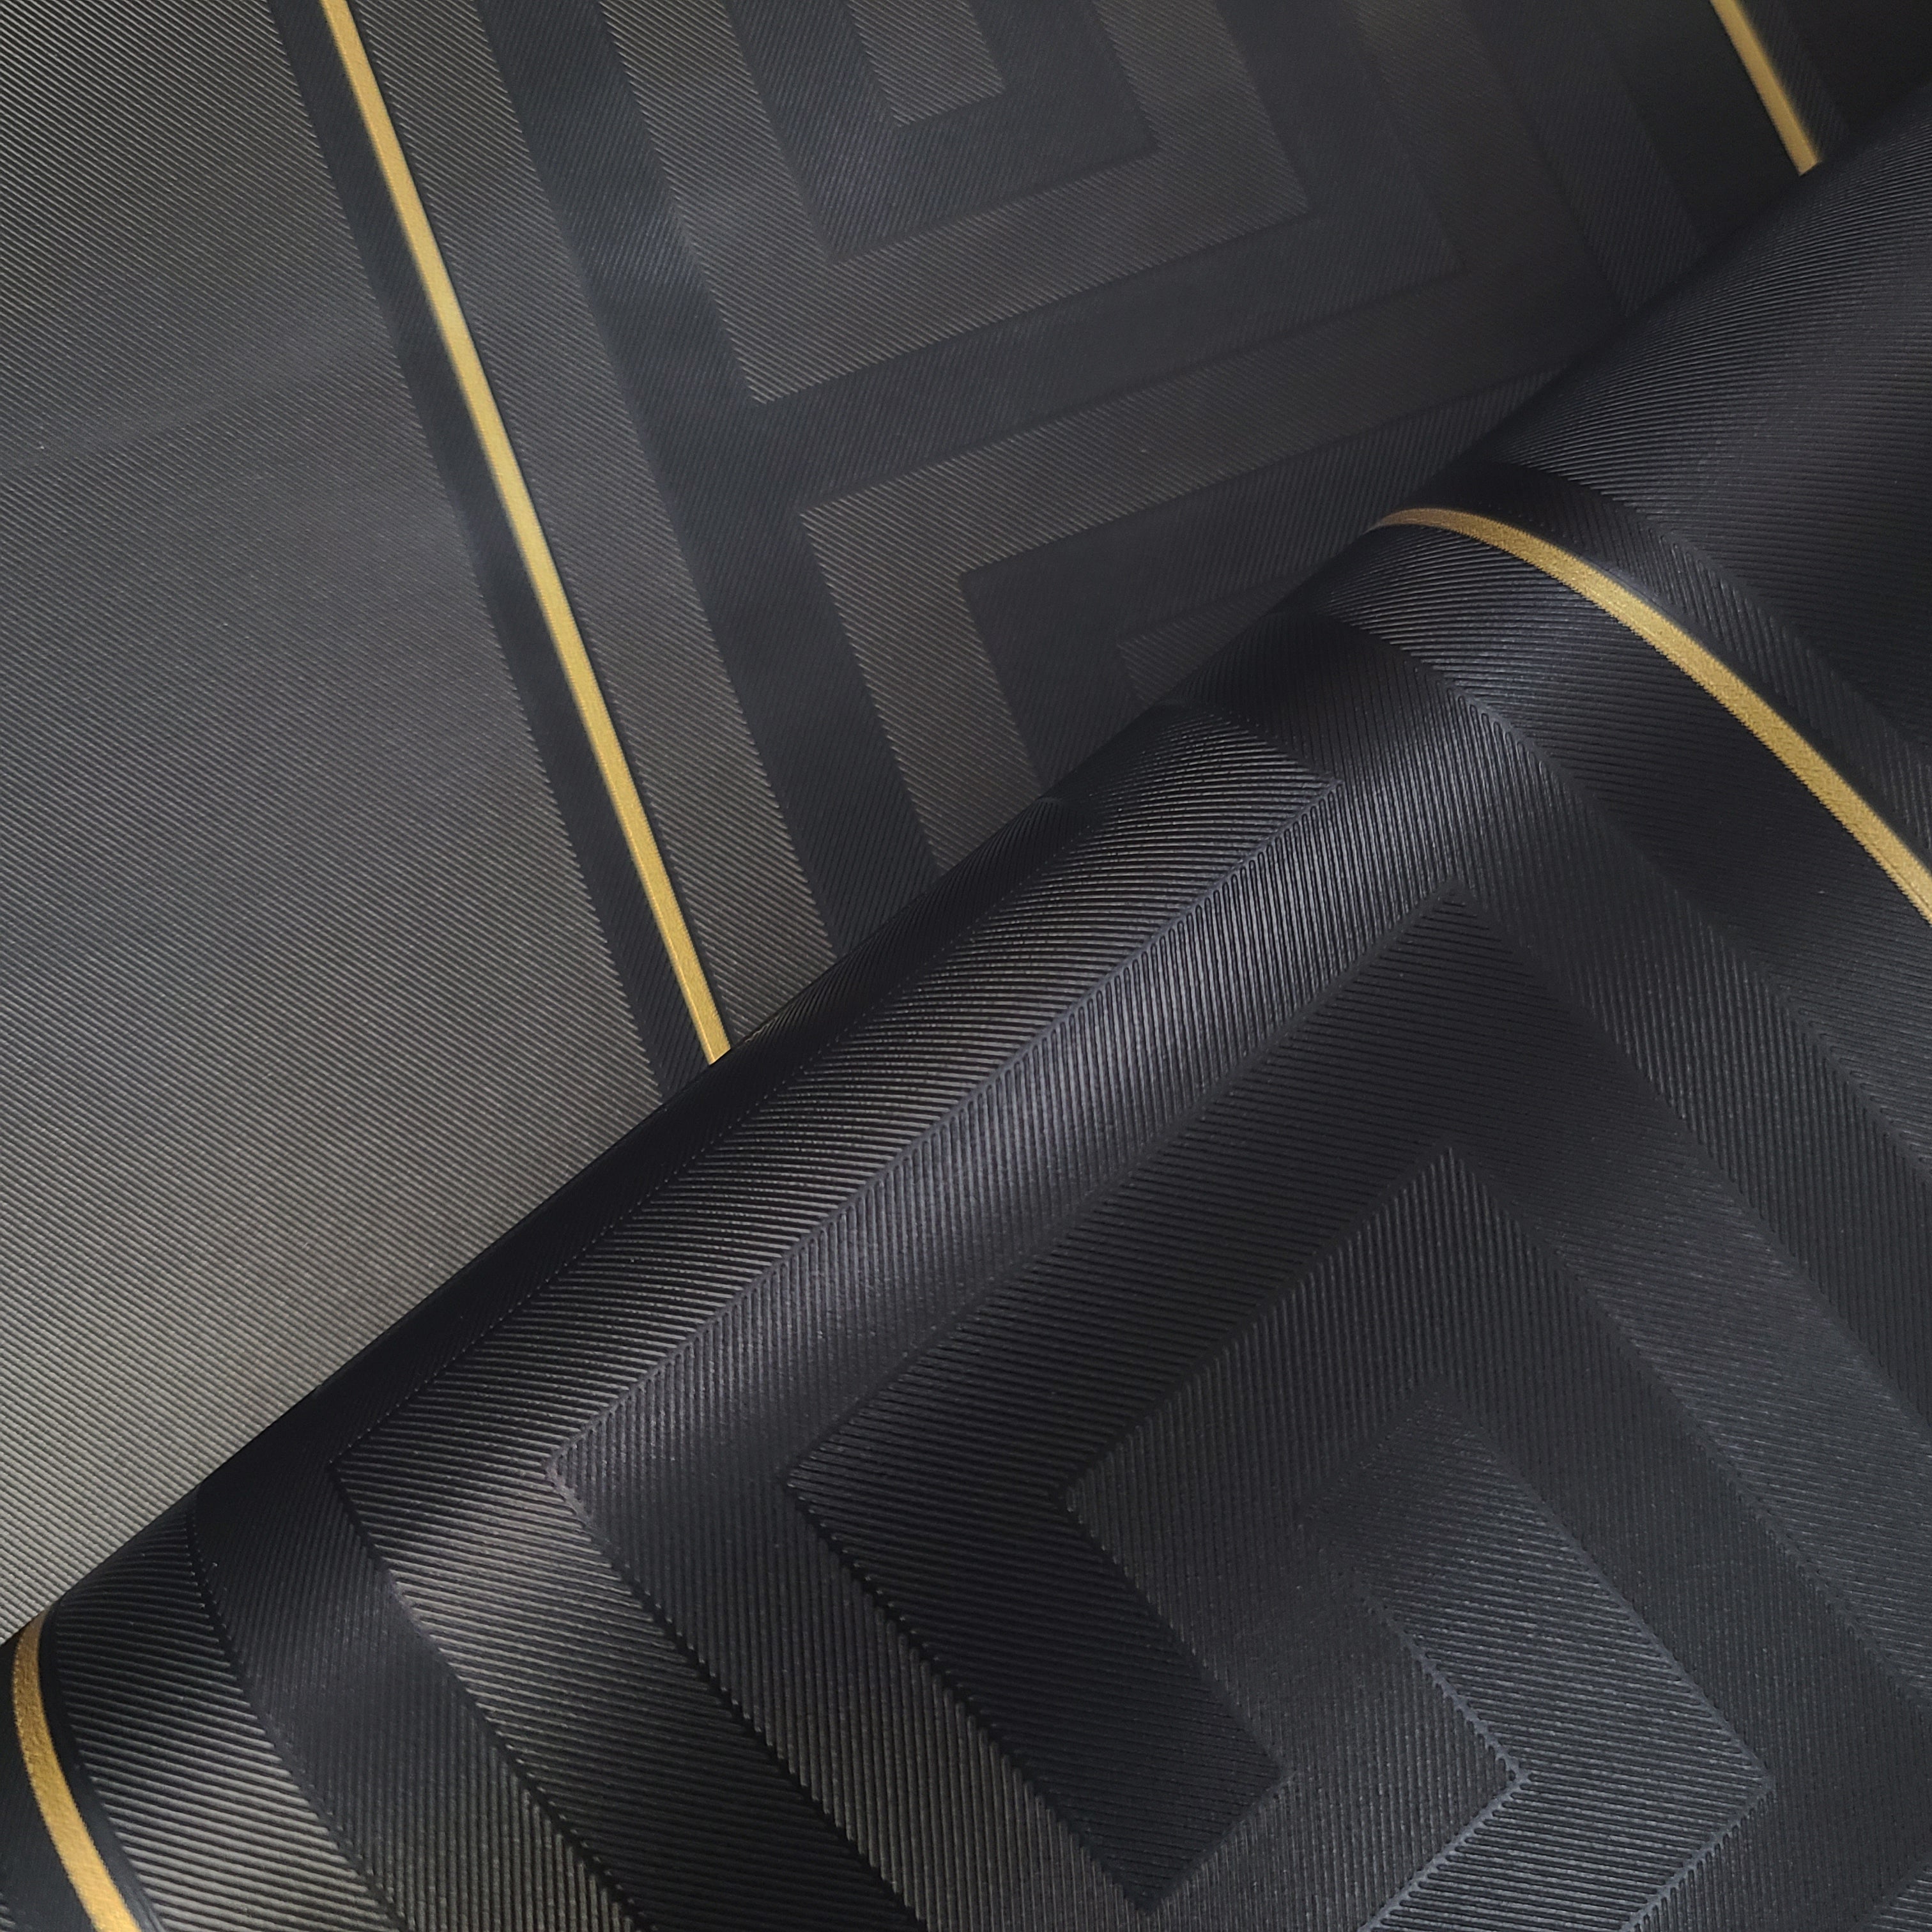 gold and black striped wallpaper